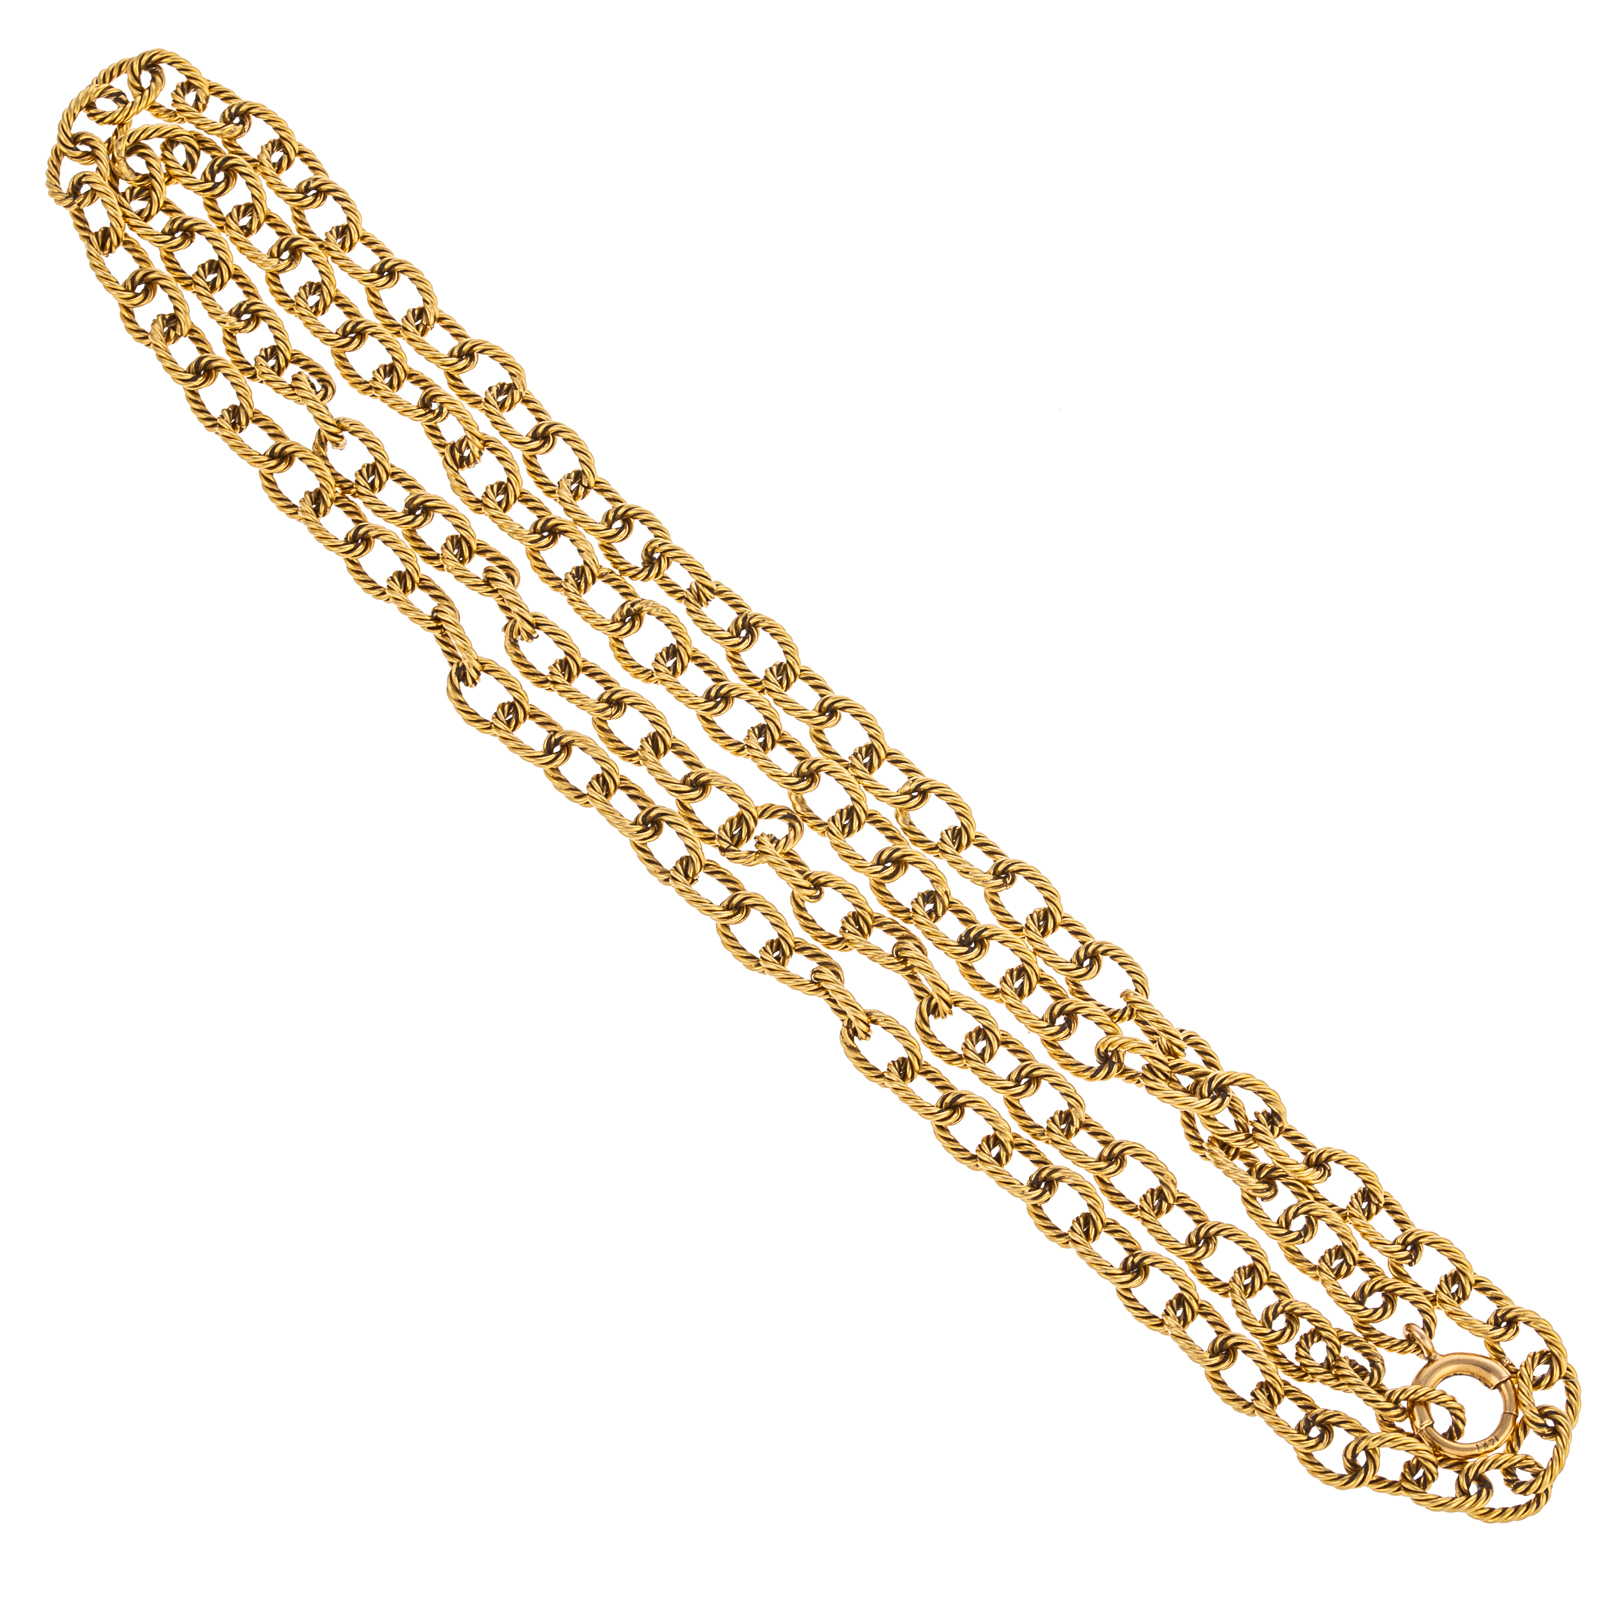 A 14K YELLOW GOLD RIBBED OVAL LINK 338d96